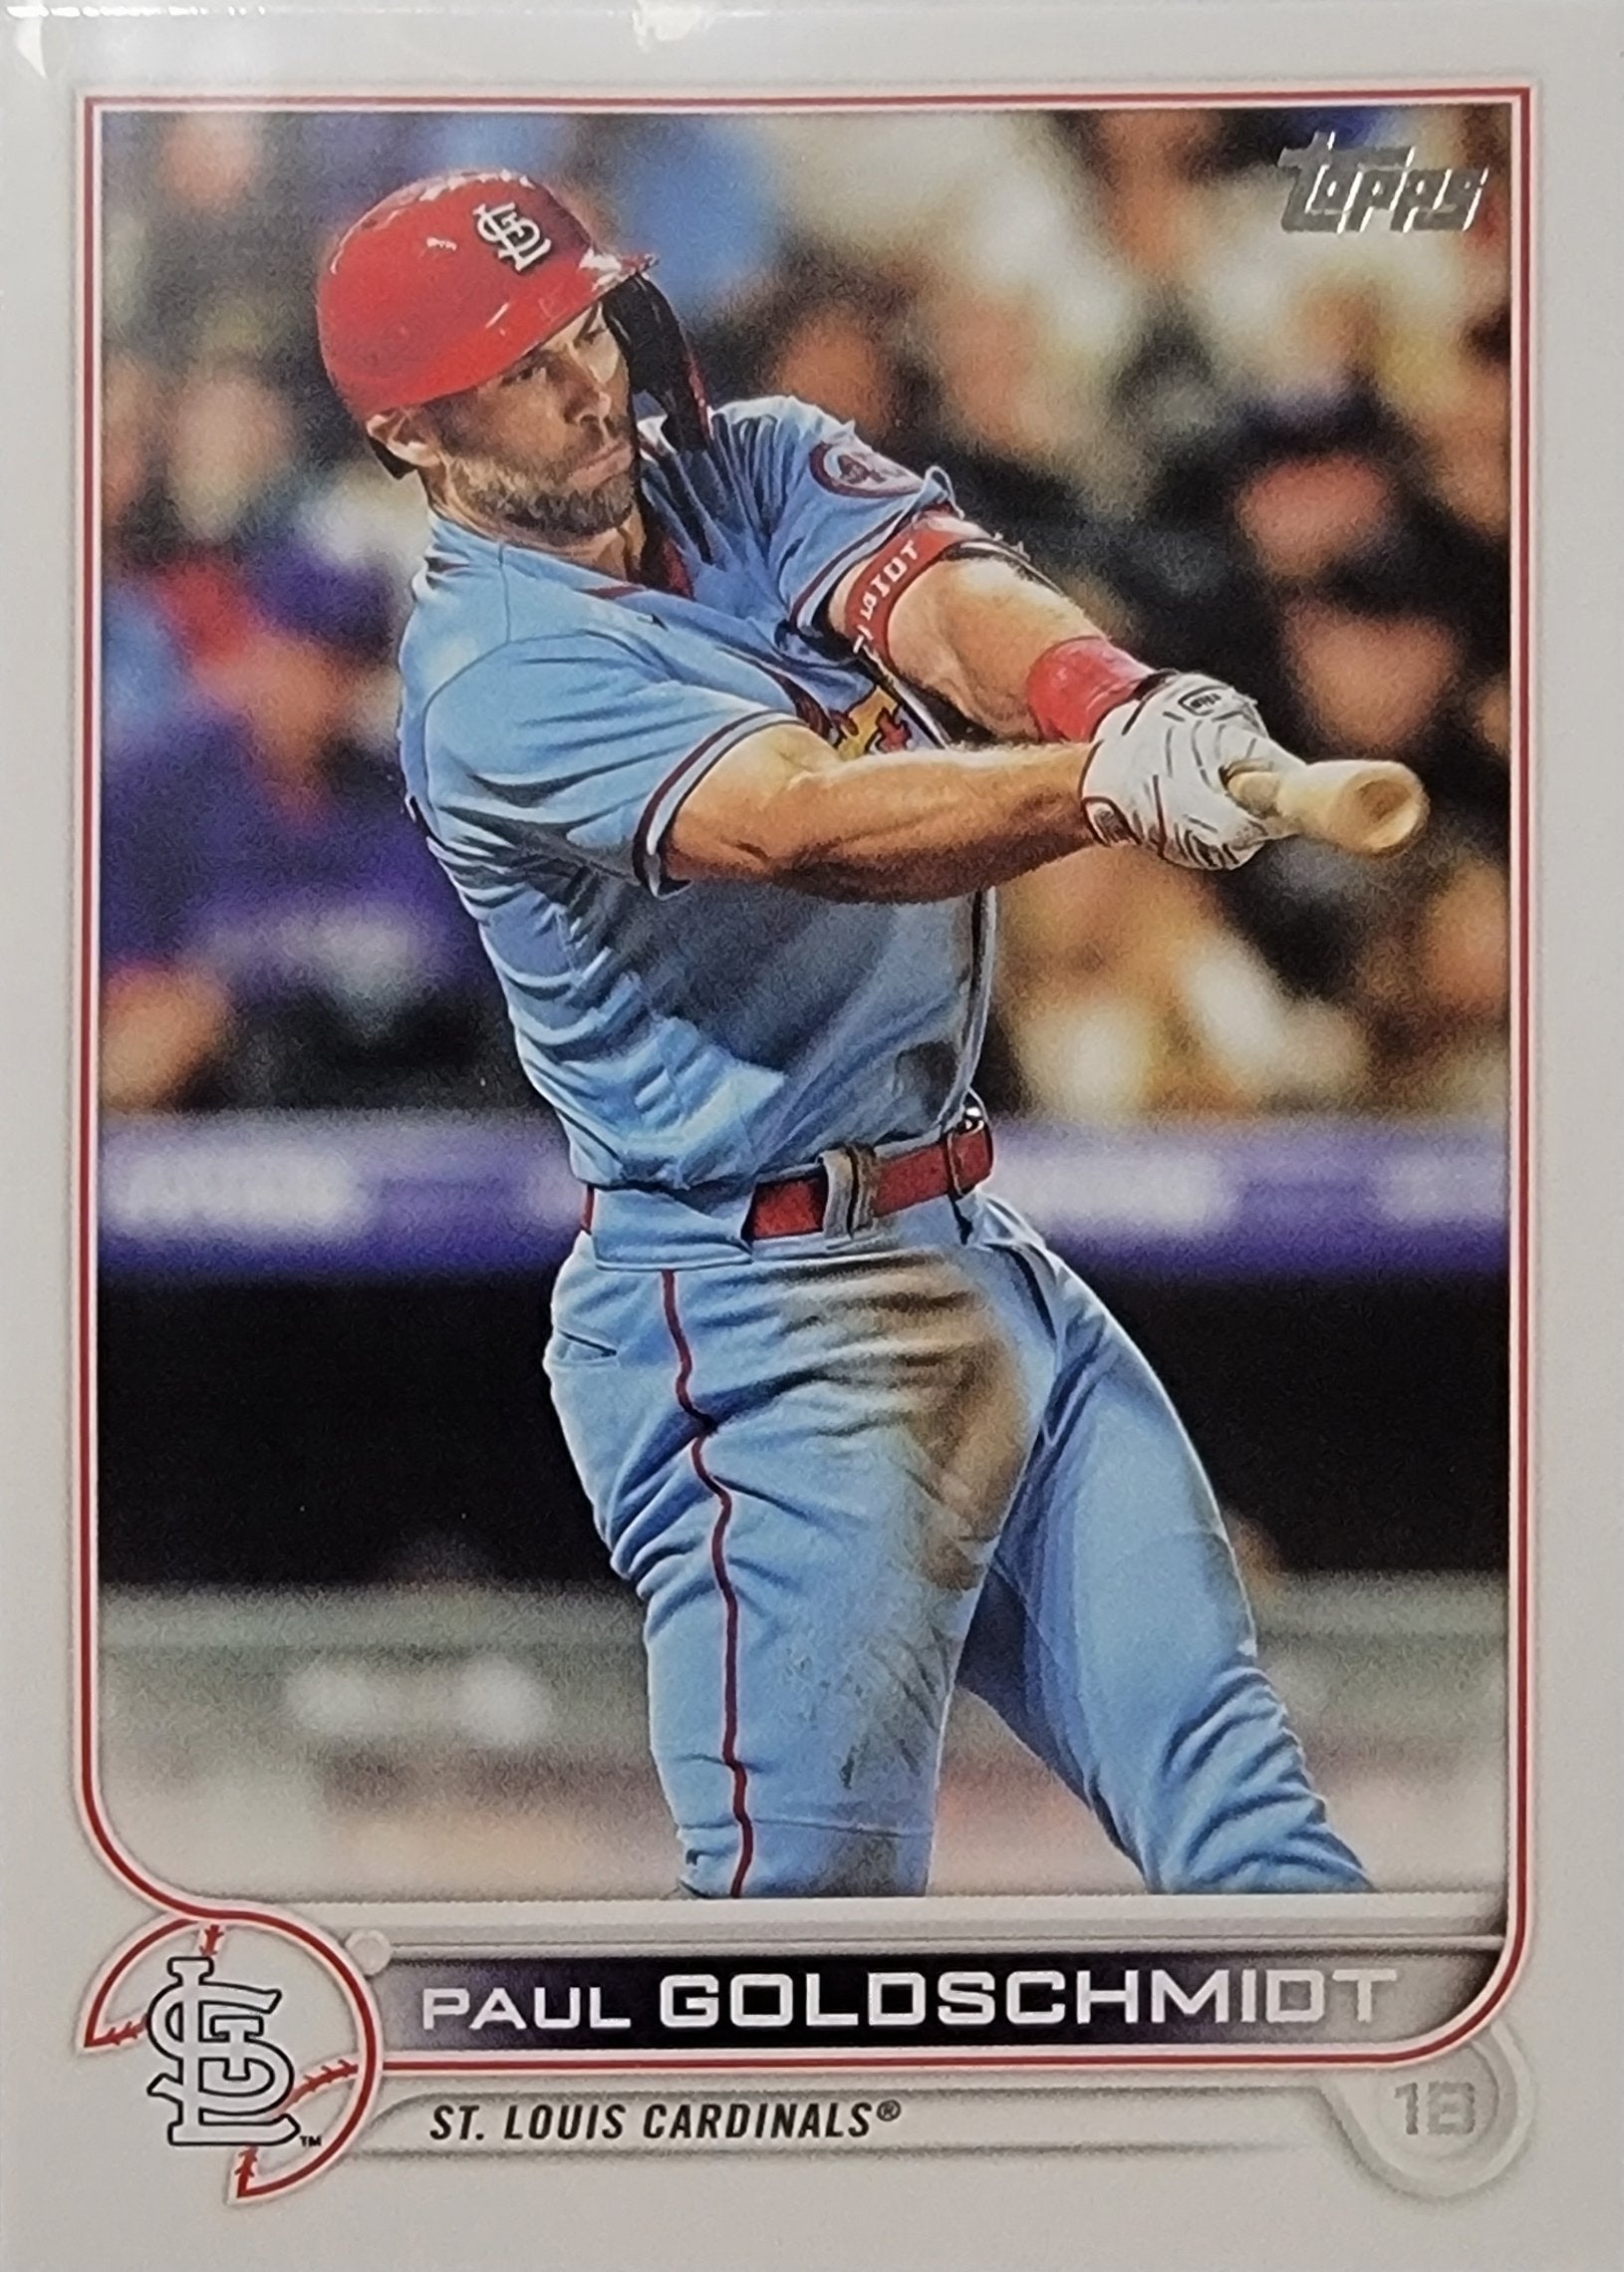 2022 Topps Series 2 Paul Goldschmidt Baseball Card AVM1 simple Xclusive Collectibles   